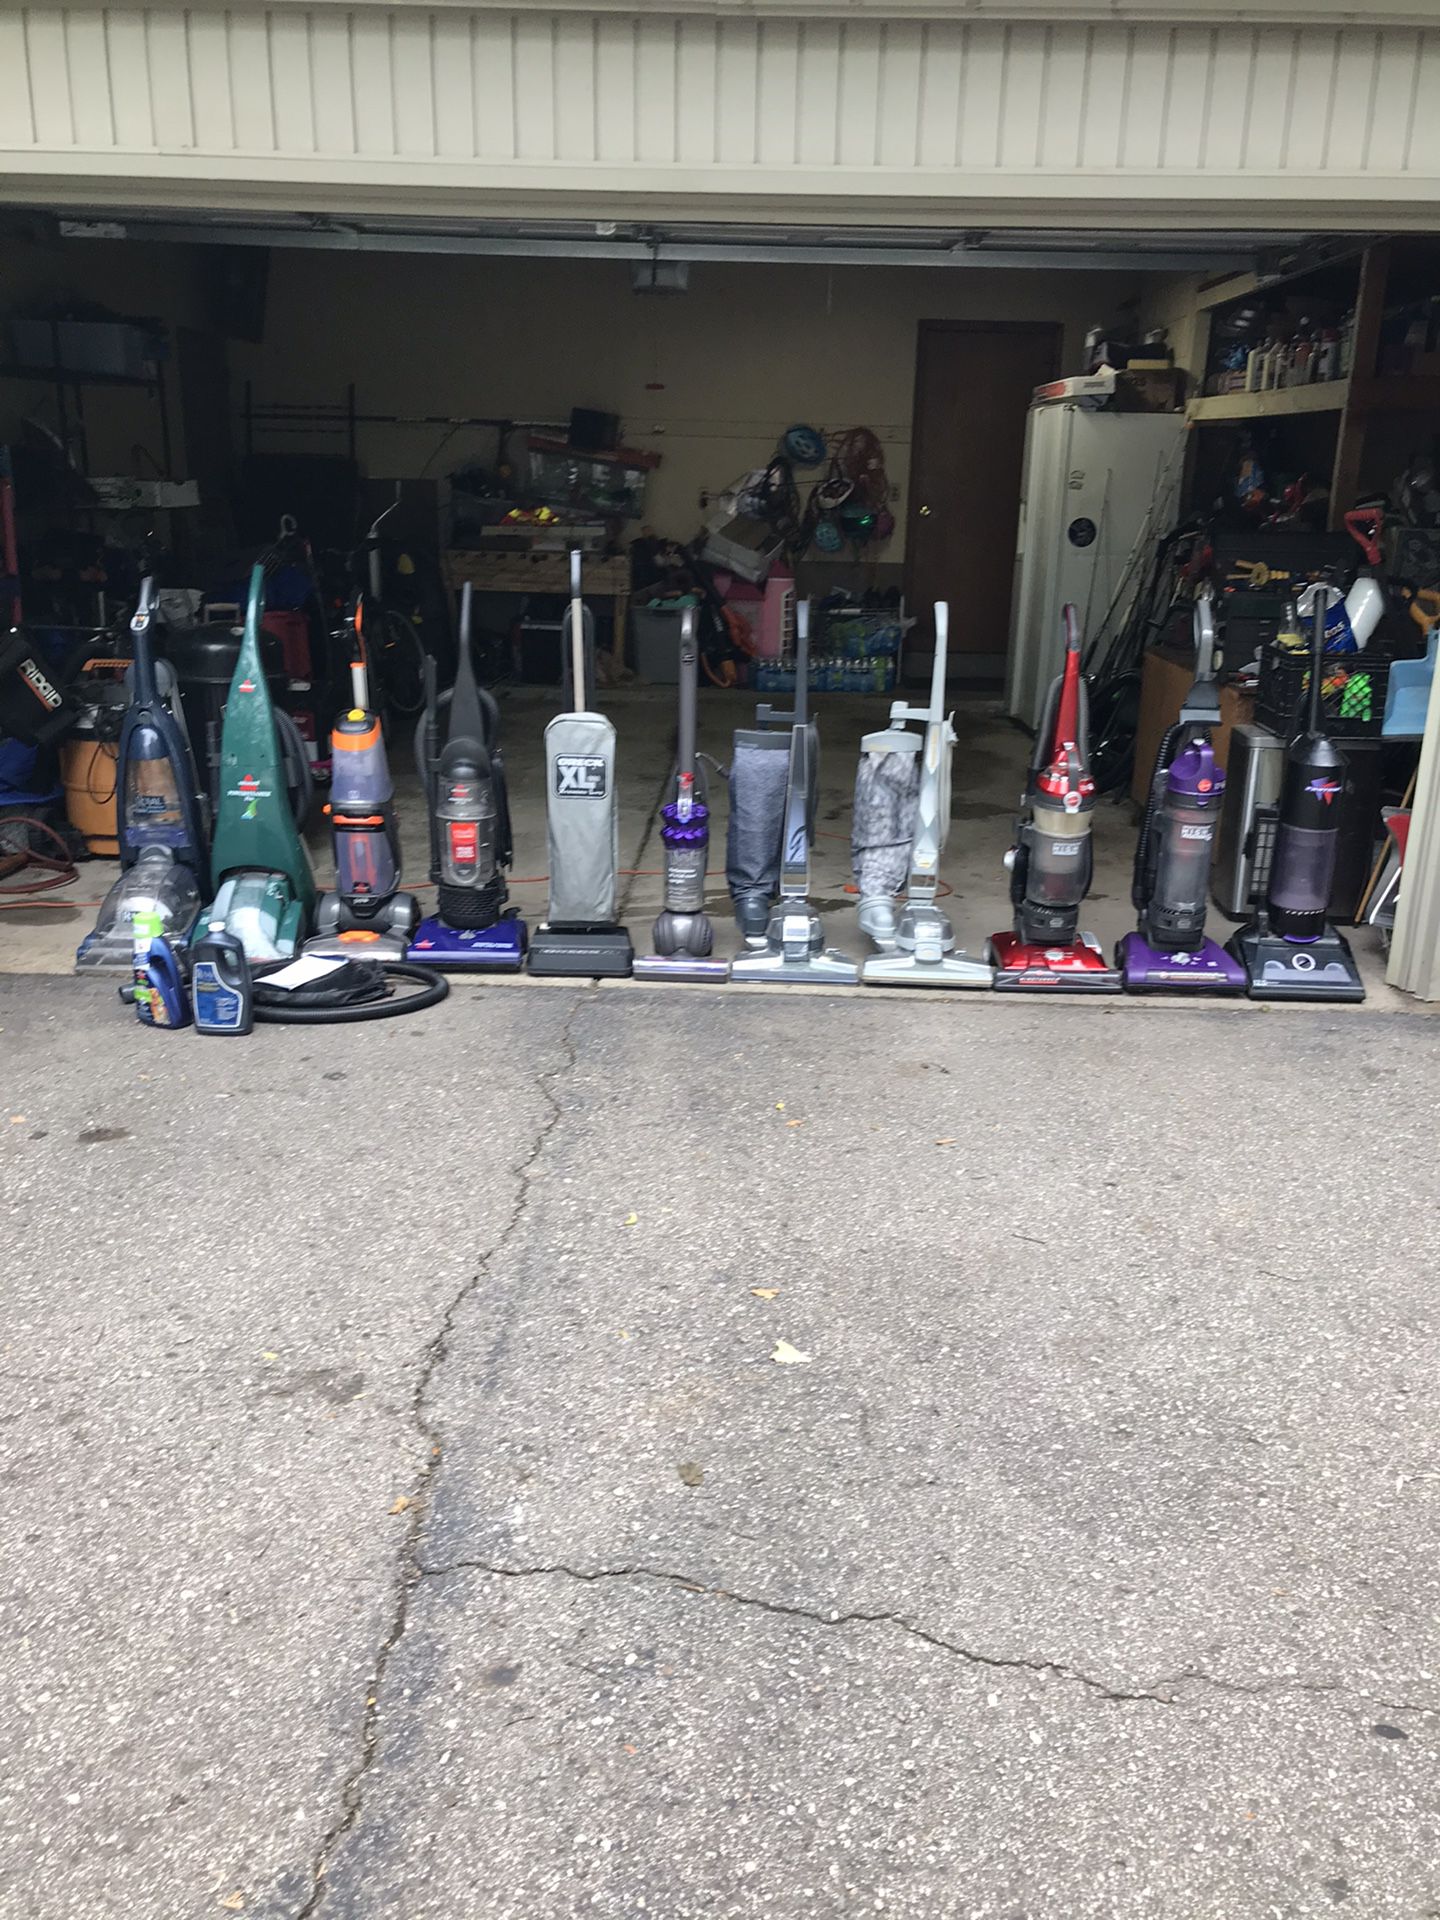 3 Carpet Cleaners, and 8 Vacuums